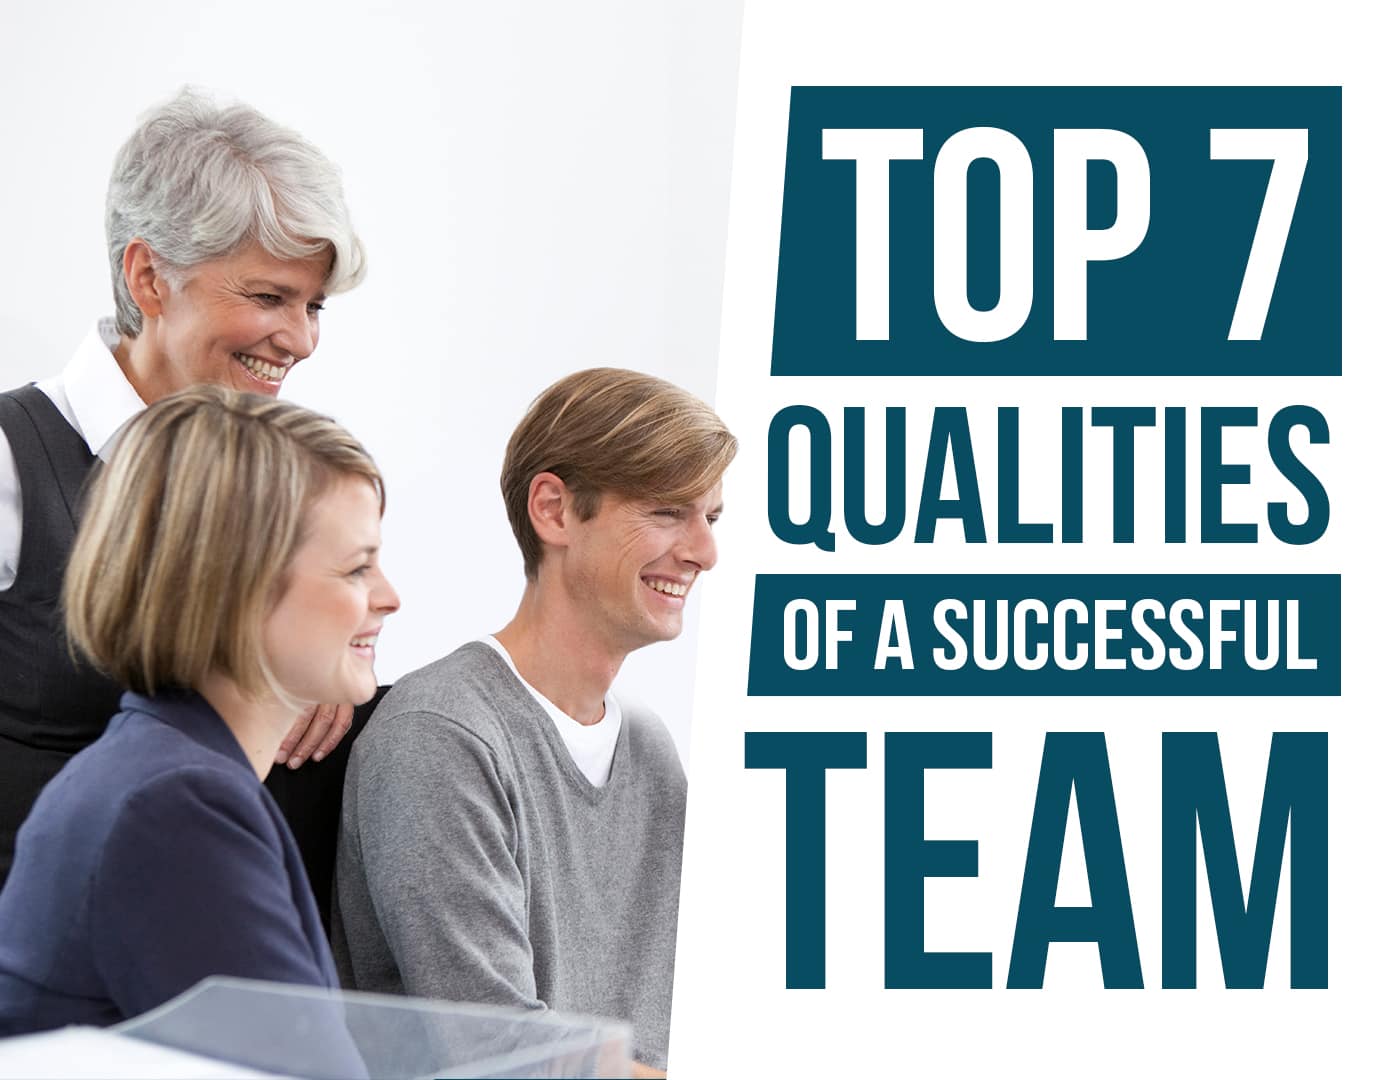 Top 7 Qualities Of A Successful Team